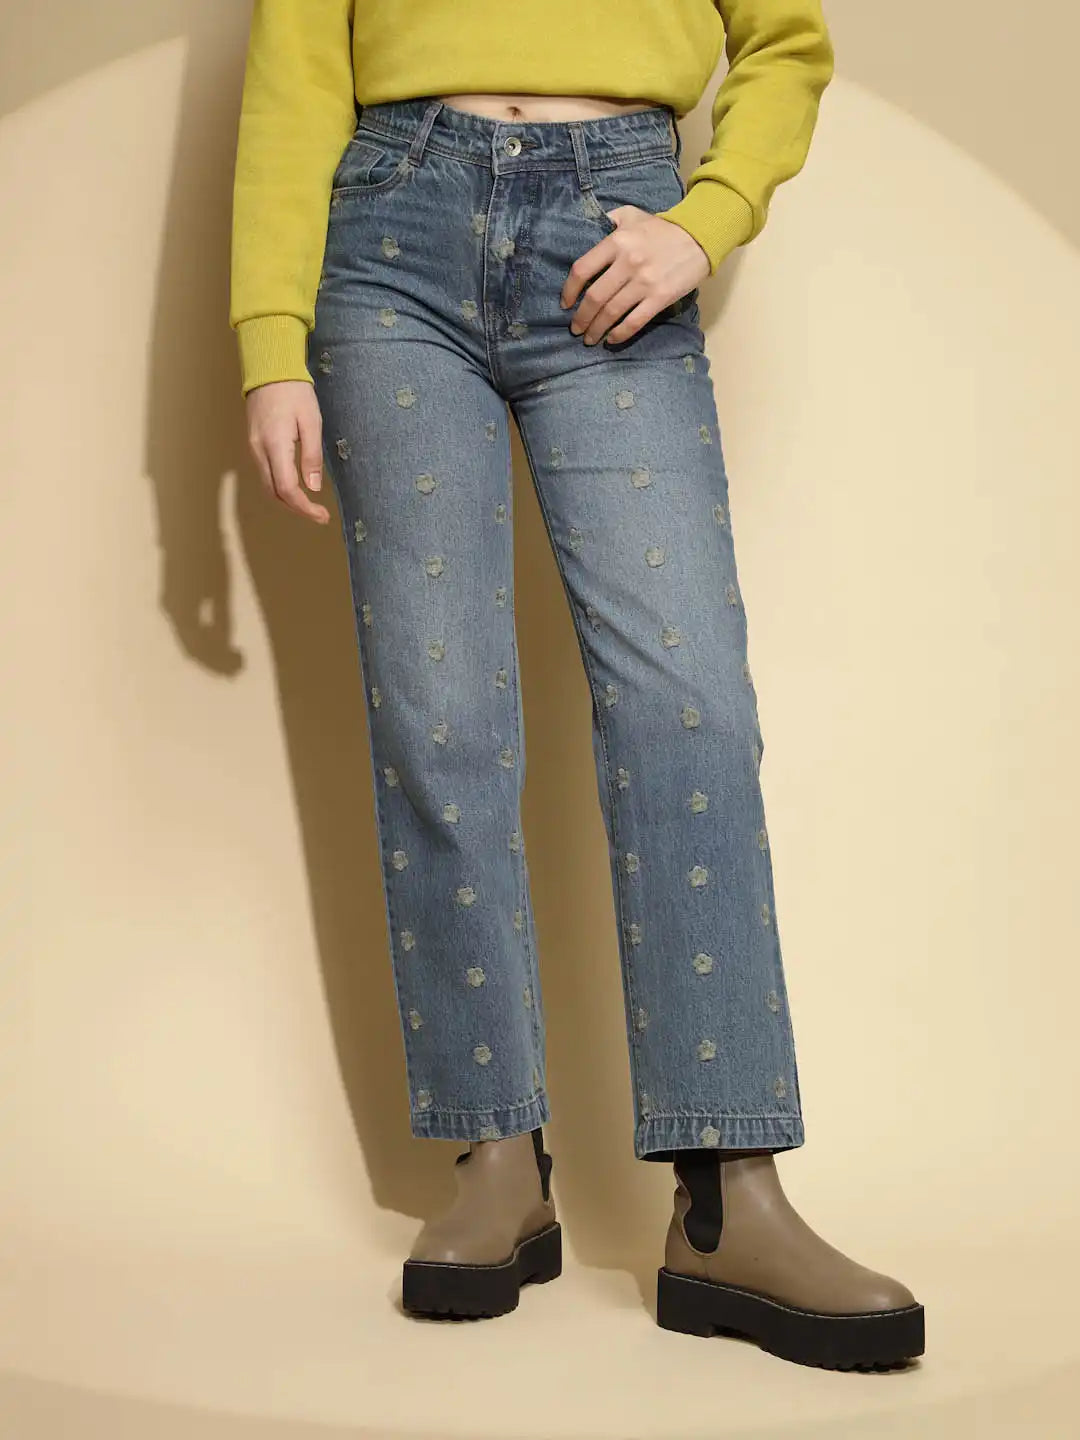 Tint Jeans for Women